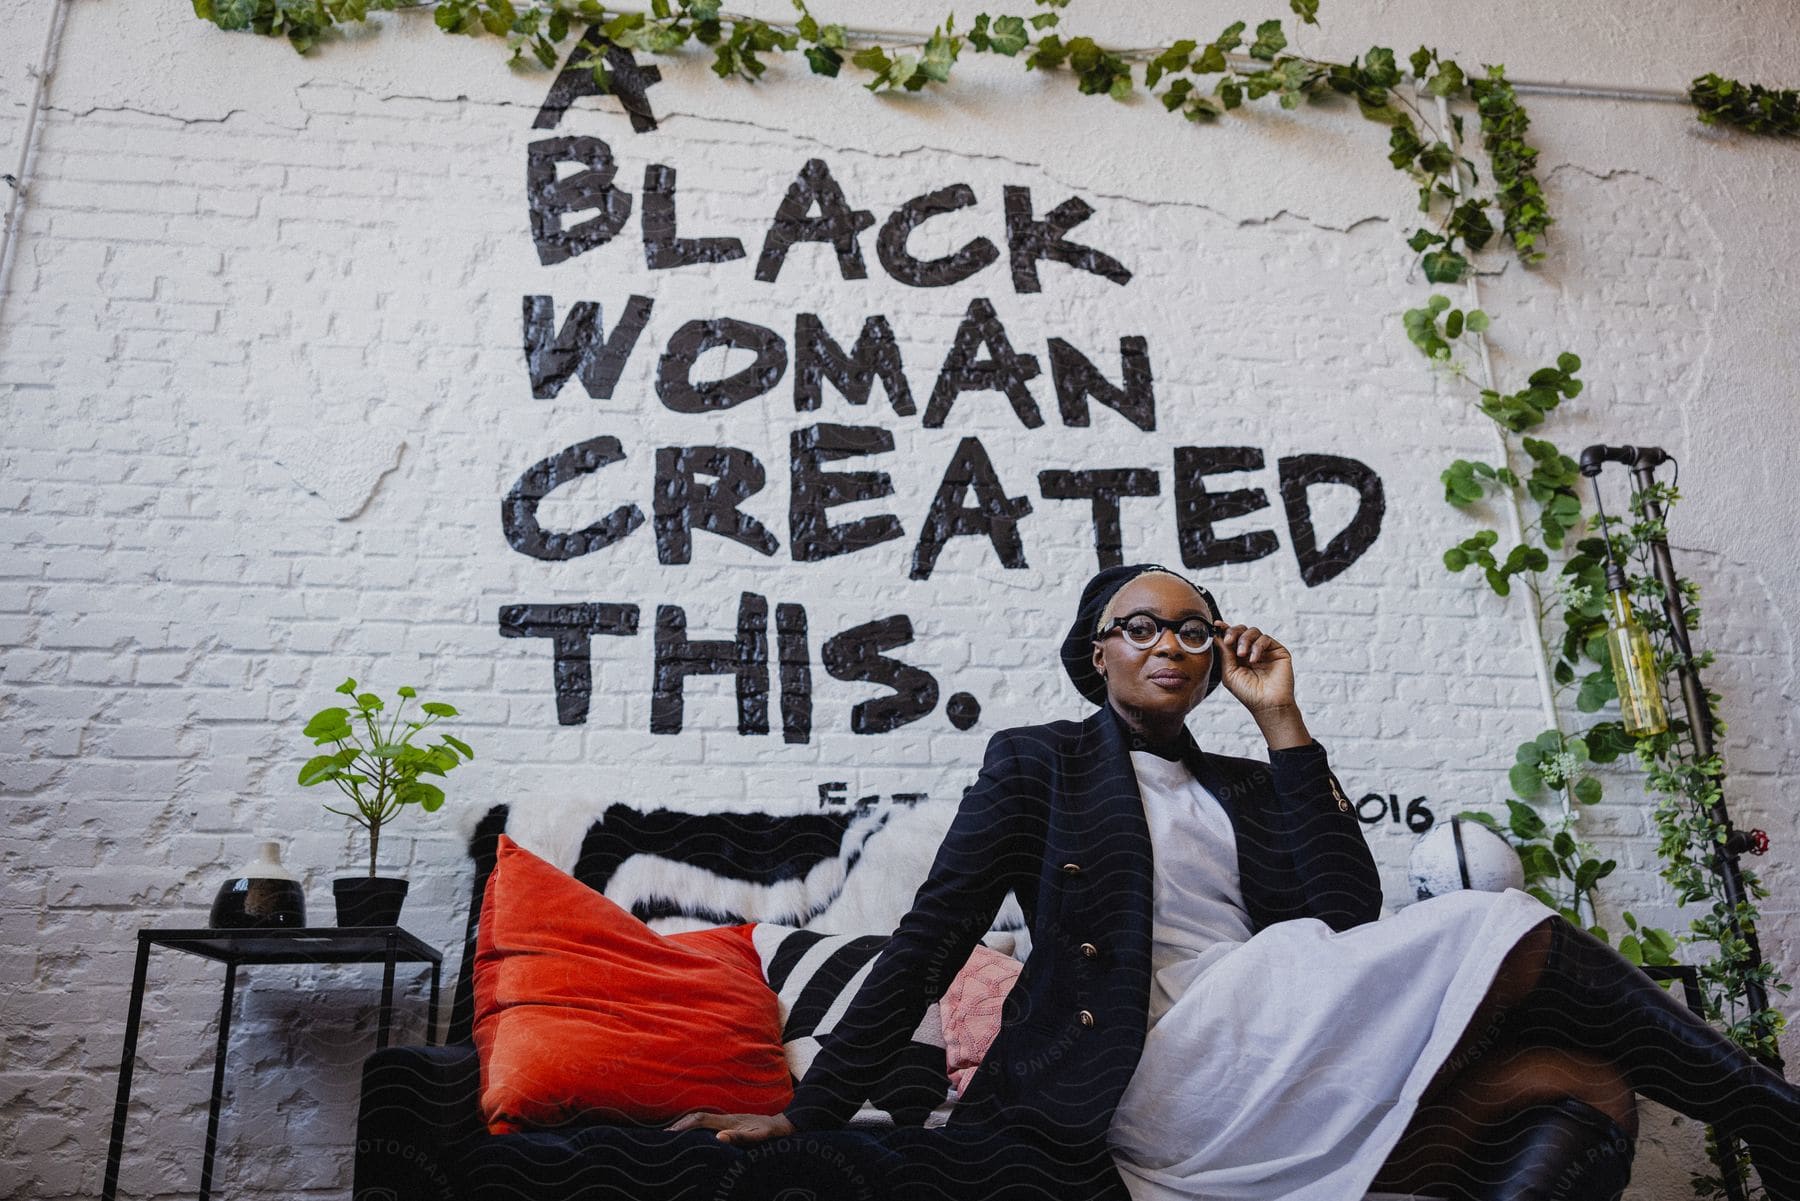 A black woman sits and poses in front of an inspirational message painted on the brick wall behind her.